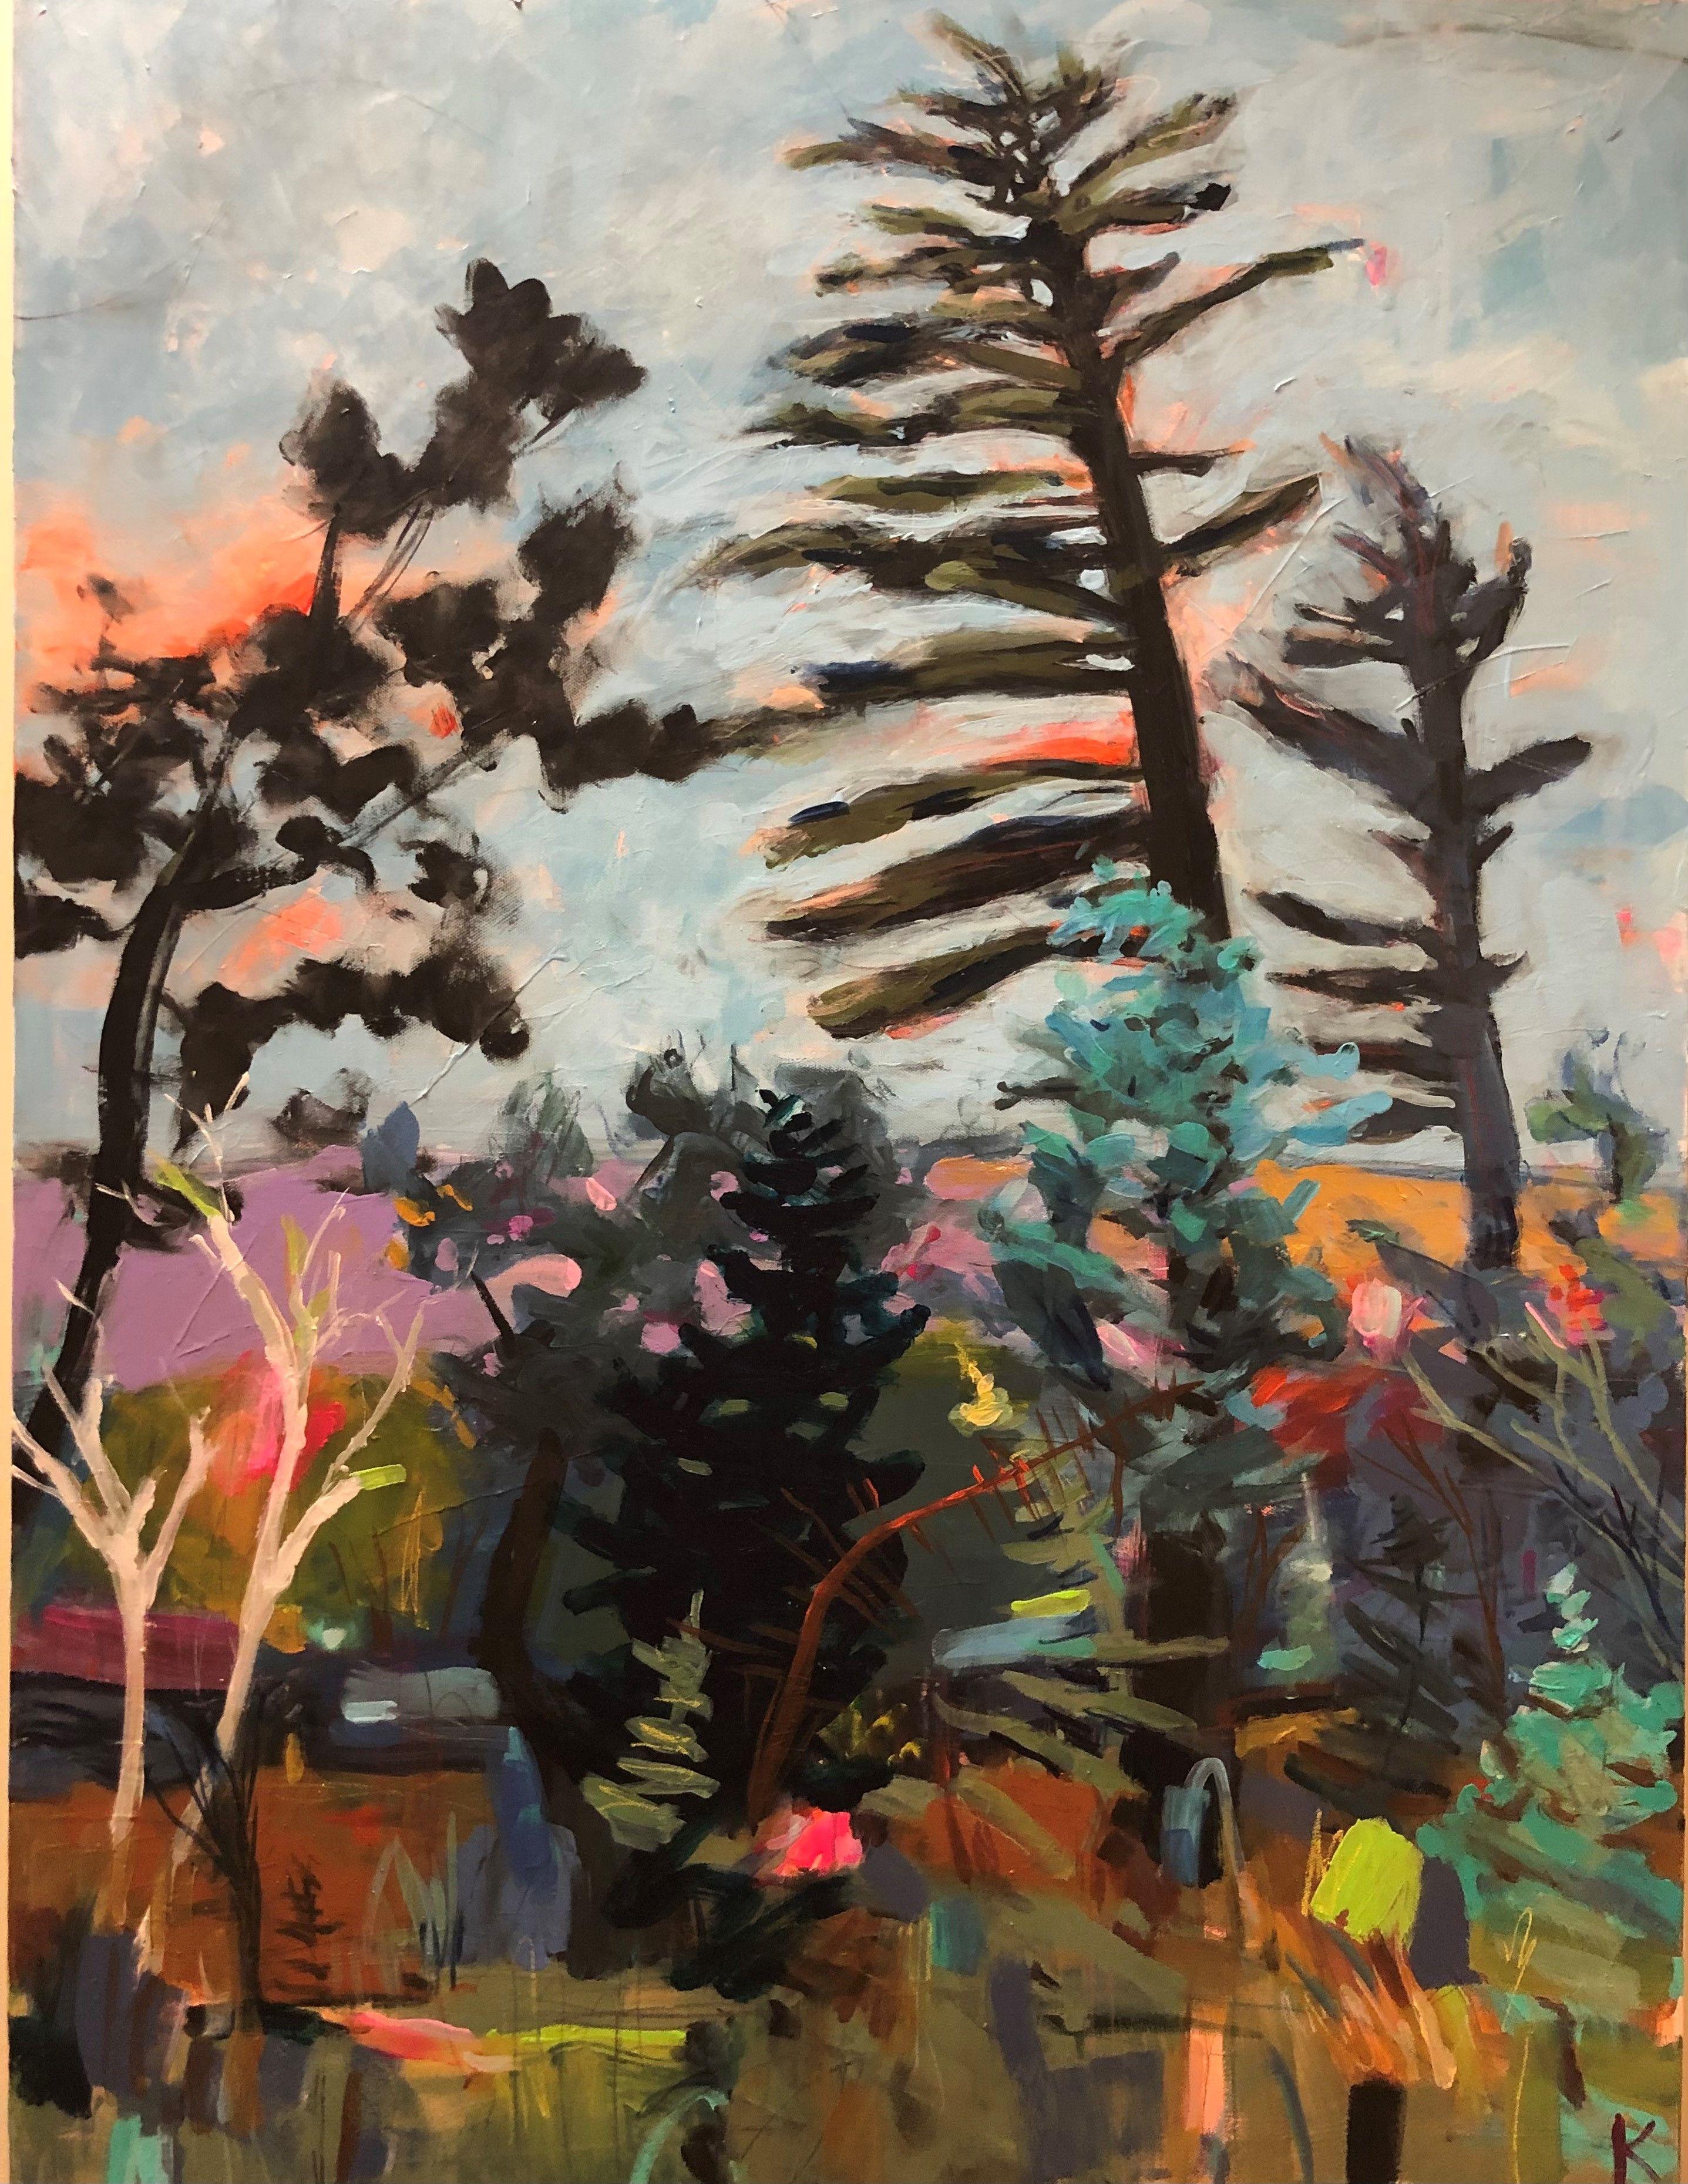 Rebecca Klementovich Abstract Painting - Pines in the Twilight World, Painting, Acrylic on Canvas